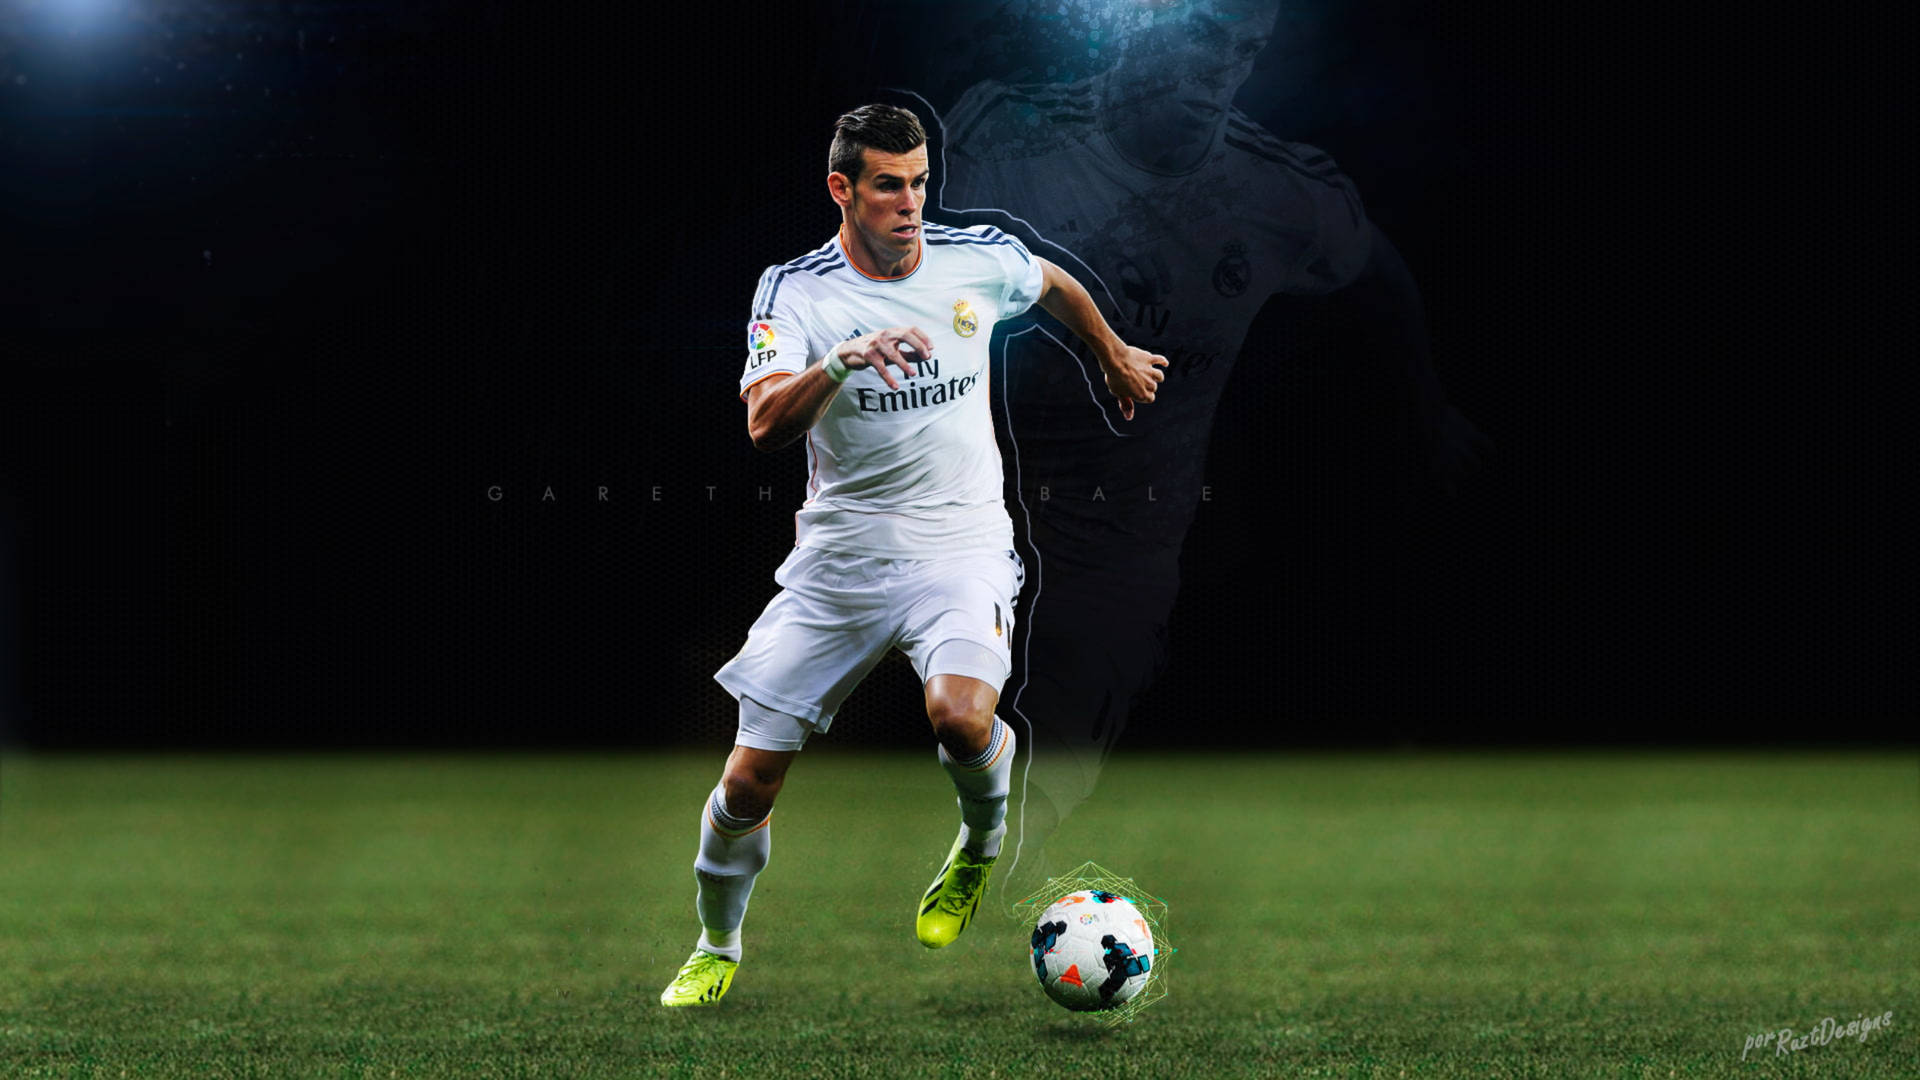 Gareth Bale With Ball In Field Background